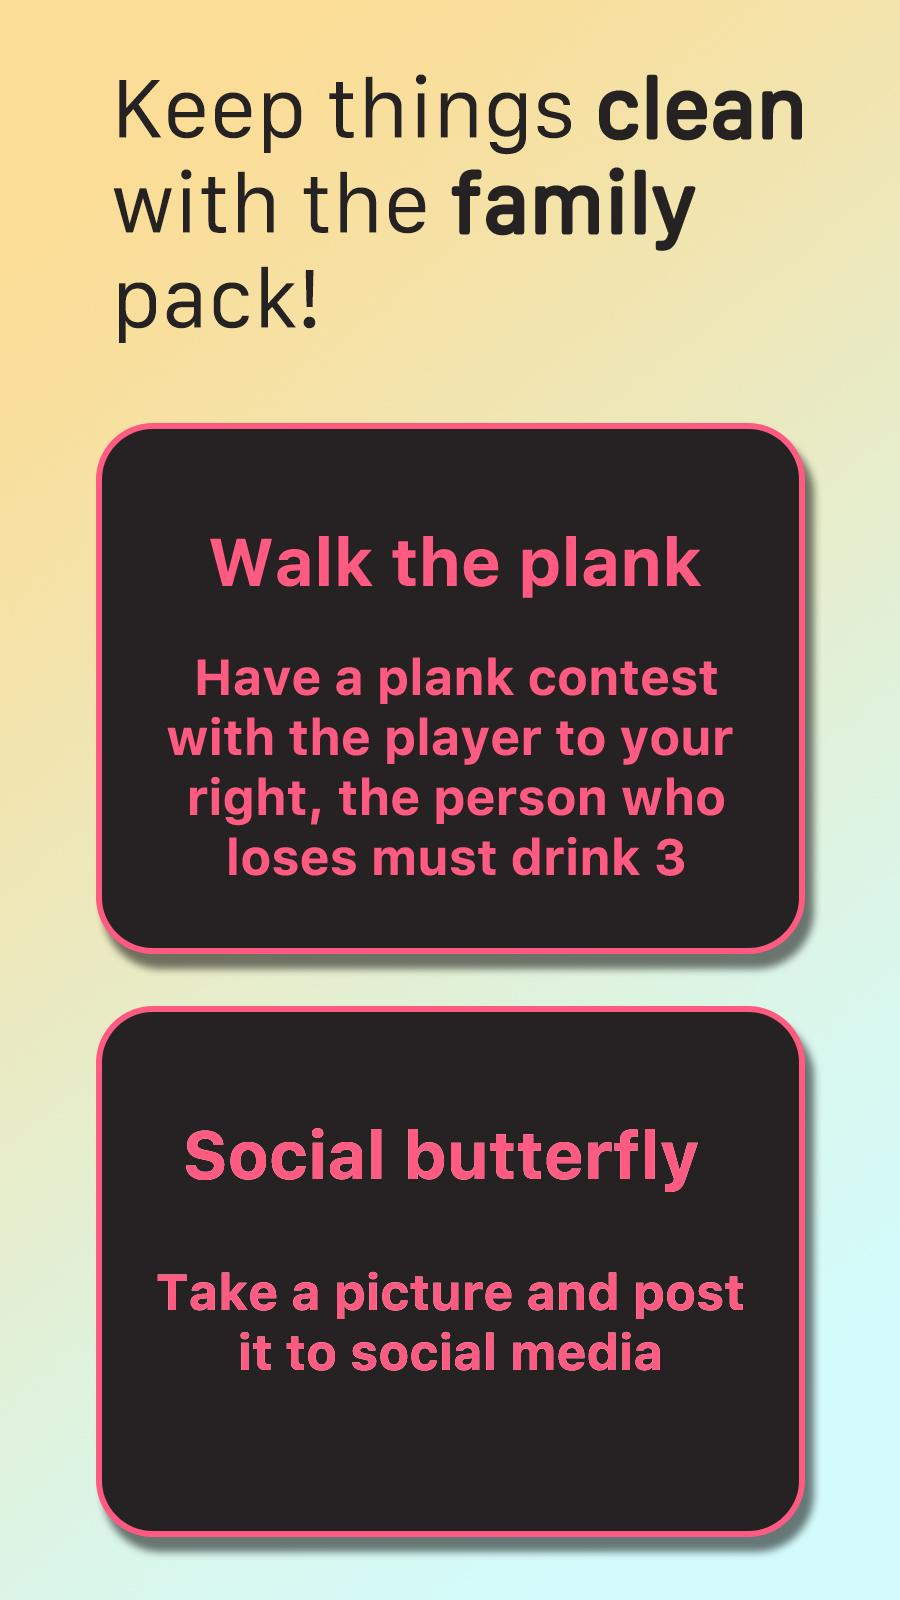 Game Night - The Party Card Game 1.1.45 Screenshot 17